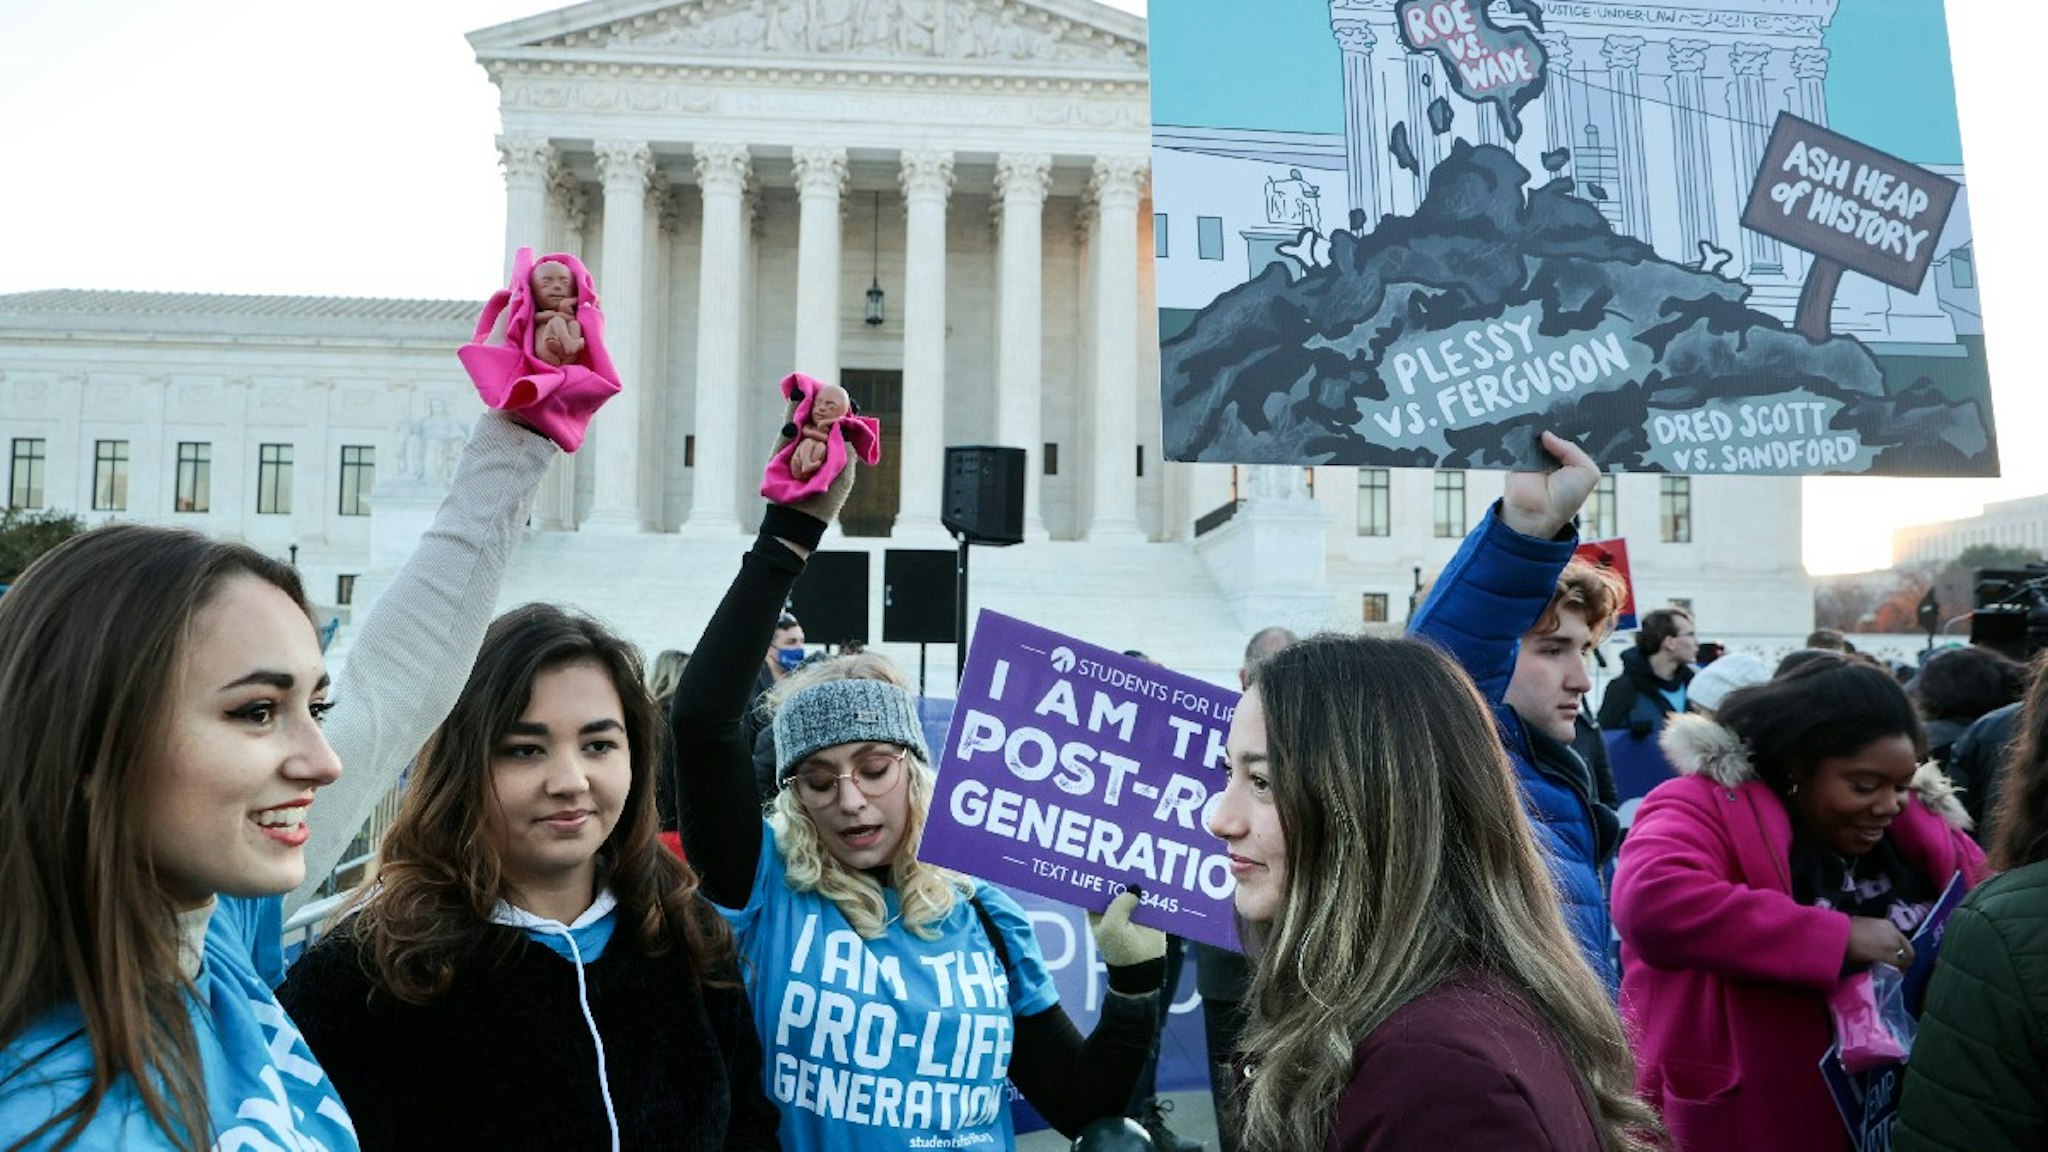 rotesters, demonstrators and activists gather in front of the U.S. Supreme Court as the justices hear arguments in Dobbs v. Jackson Women's Health, a case about a Mississippi law that bans most abortions after 15 weeks, on December 01, 2021 in Washington, DC.